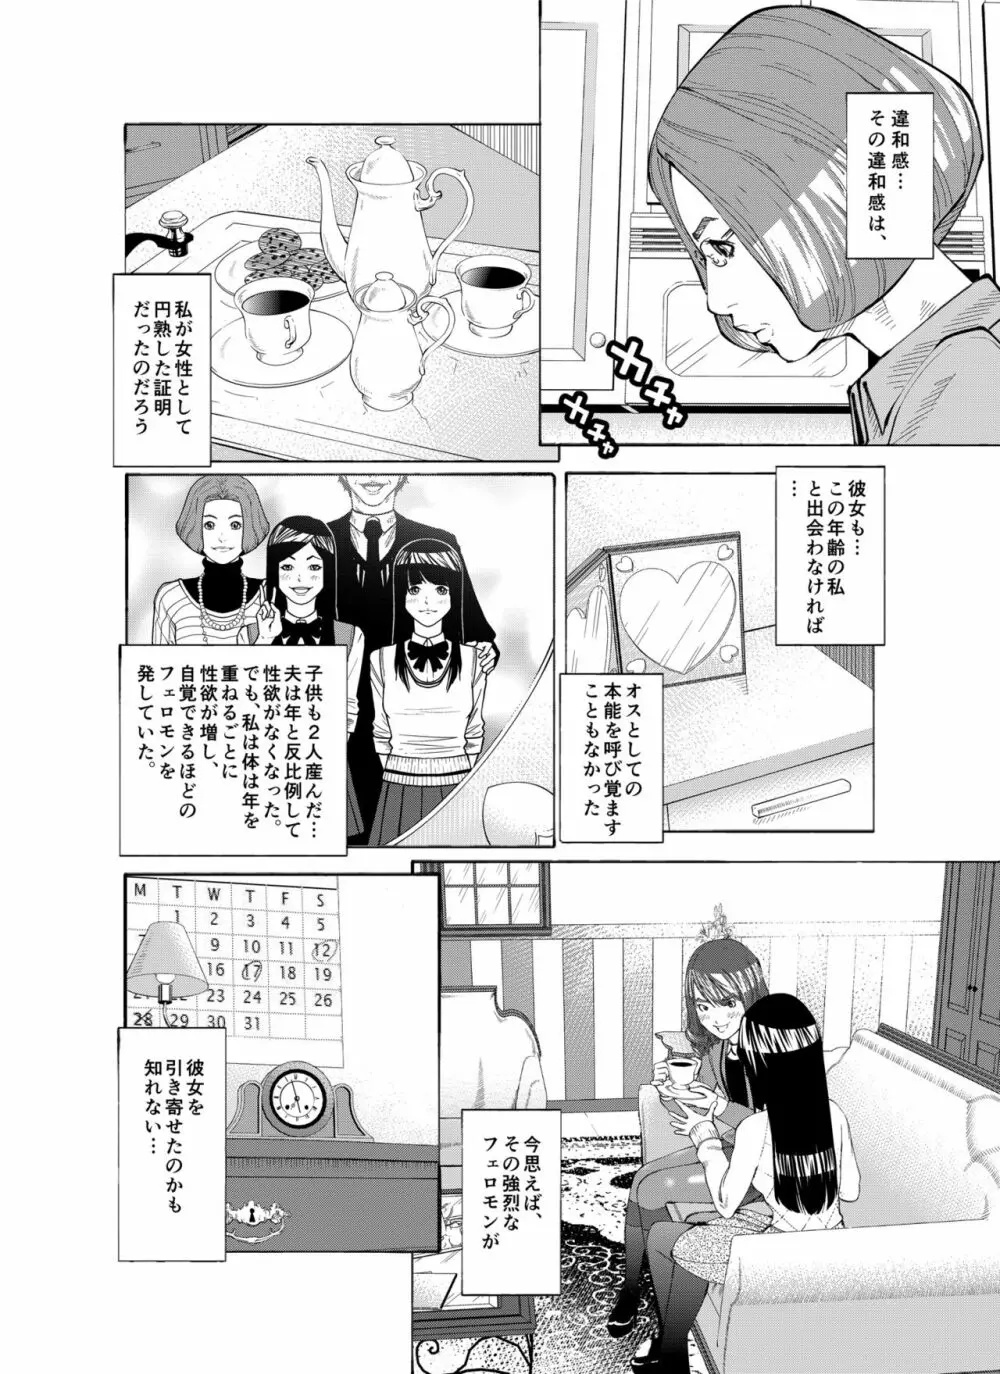 m.works vol 1 Page.4